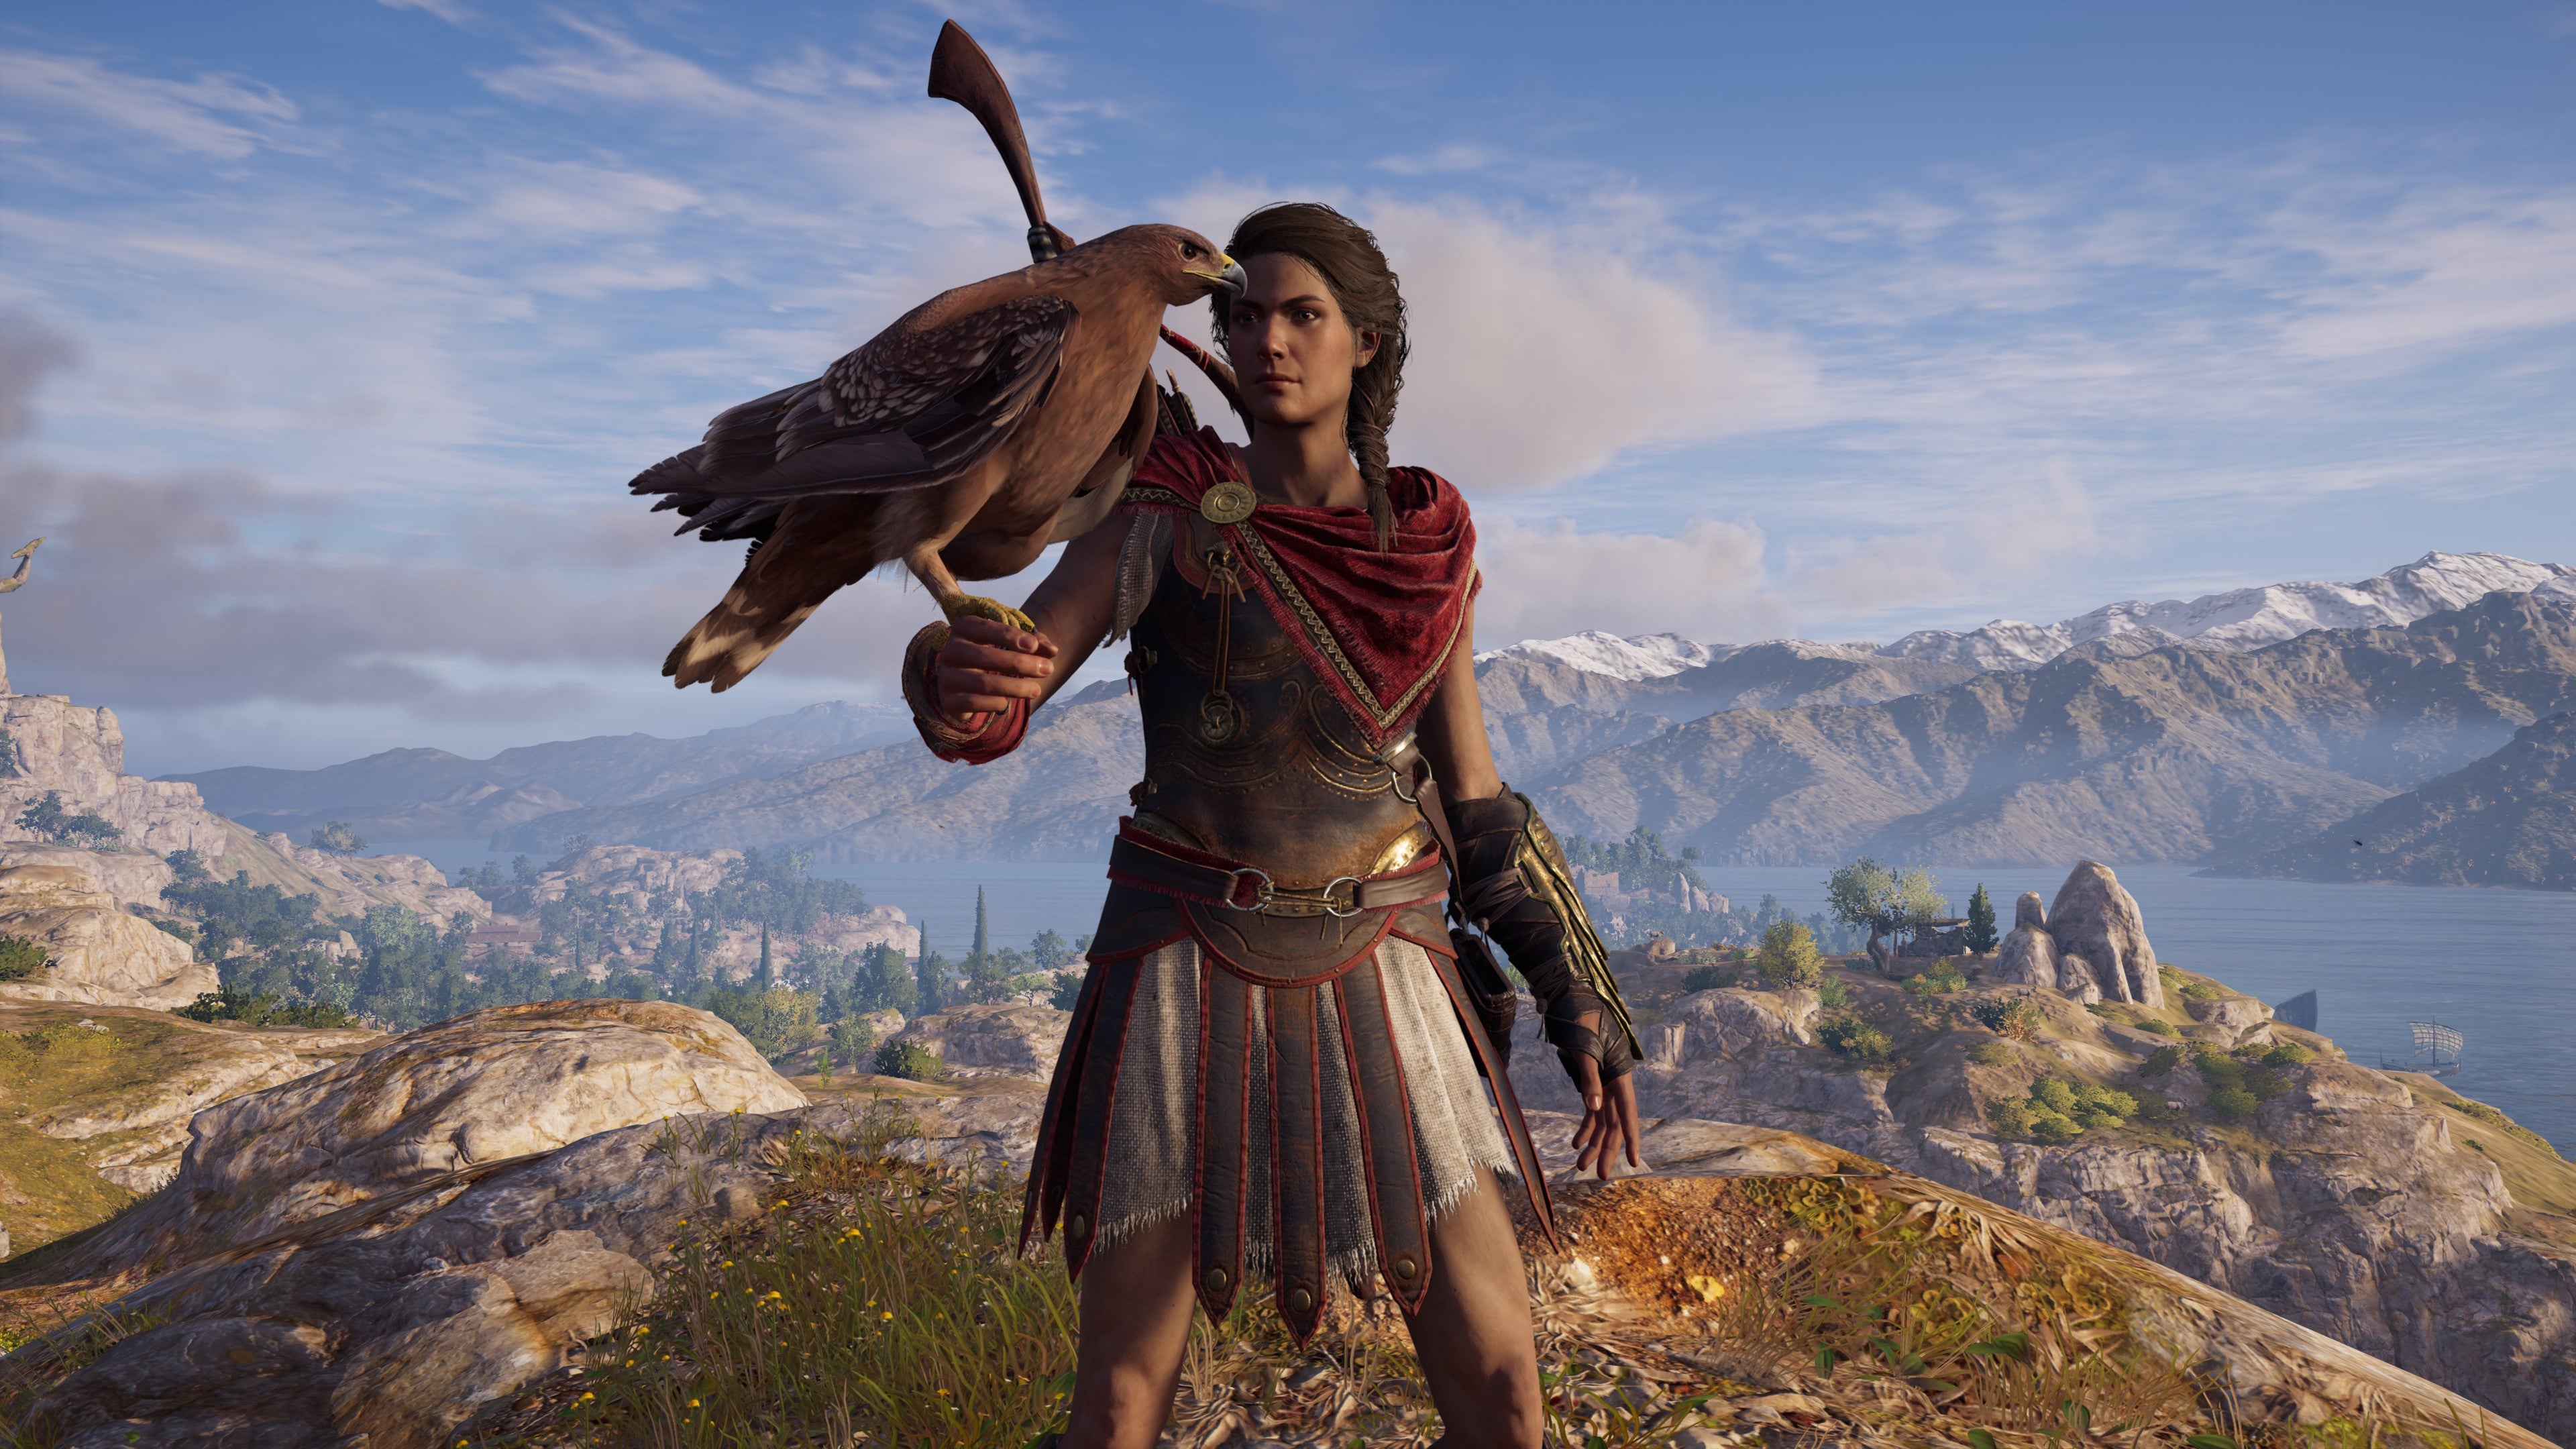 Assassin S Creed Odyssey Pc Graphics Performance How To Get The Best Settings Rock Paper Shotgun